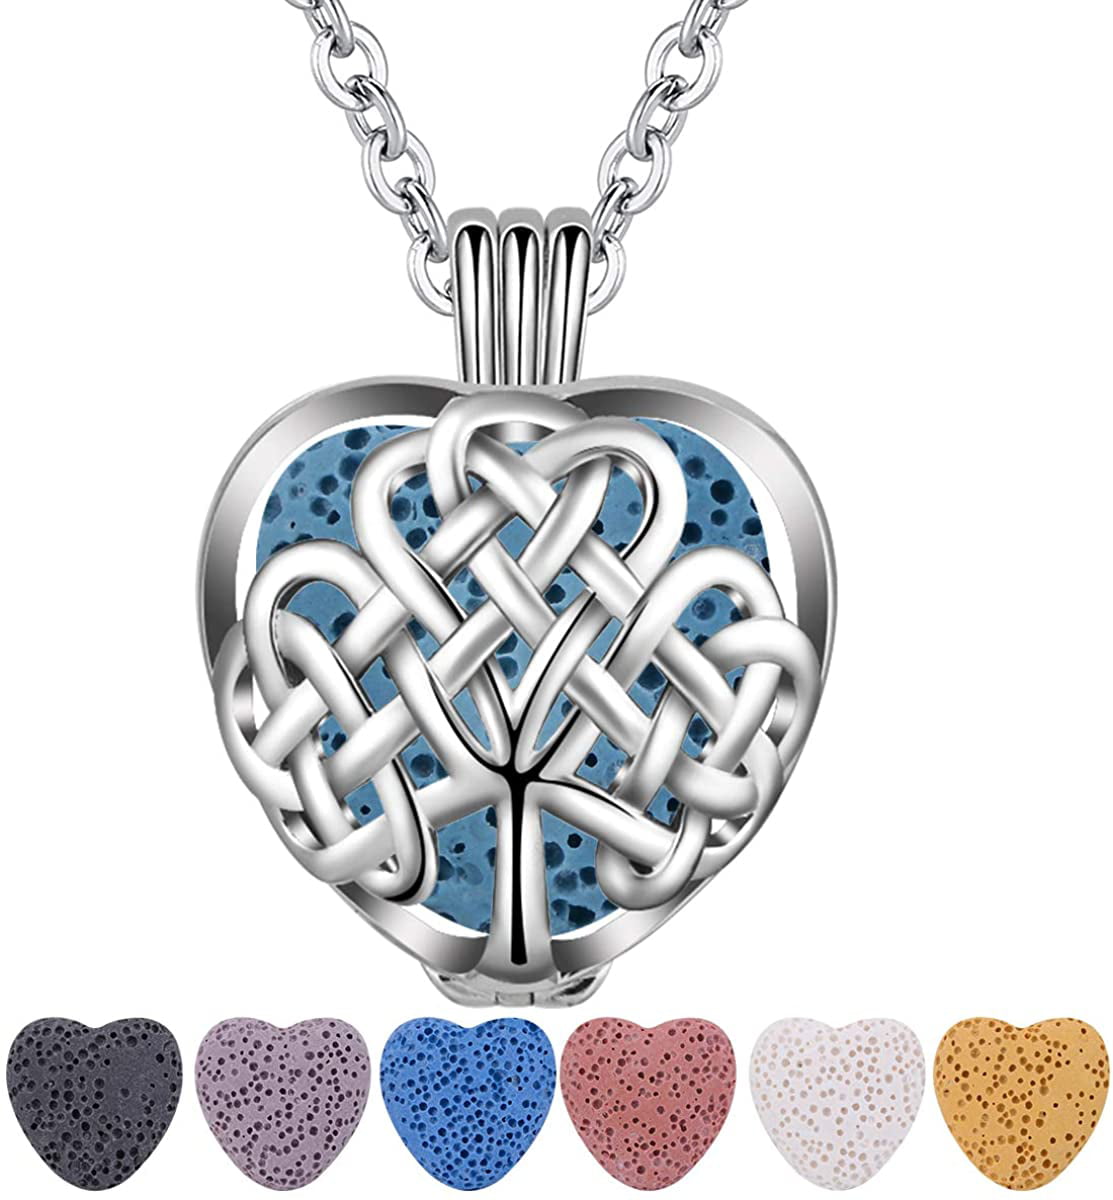 Tree of Life Aromatherapy Essential Oil Diffuser Locket Heart Shaped Necklace 